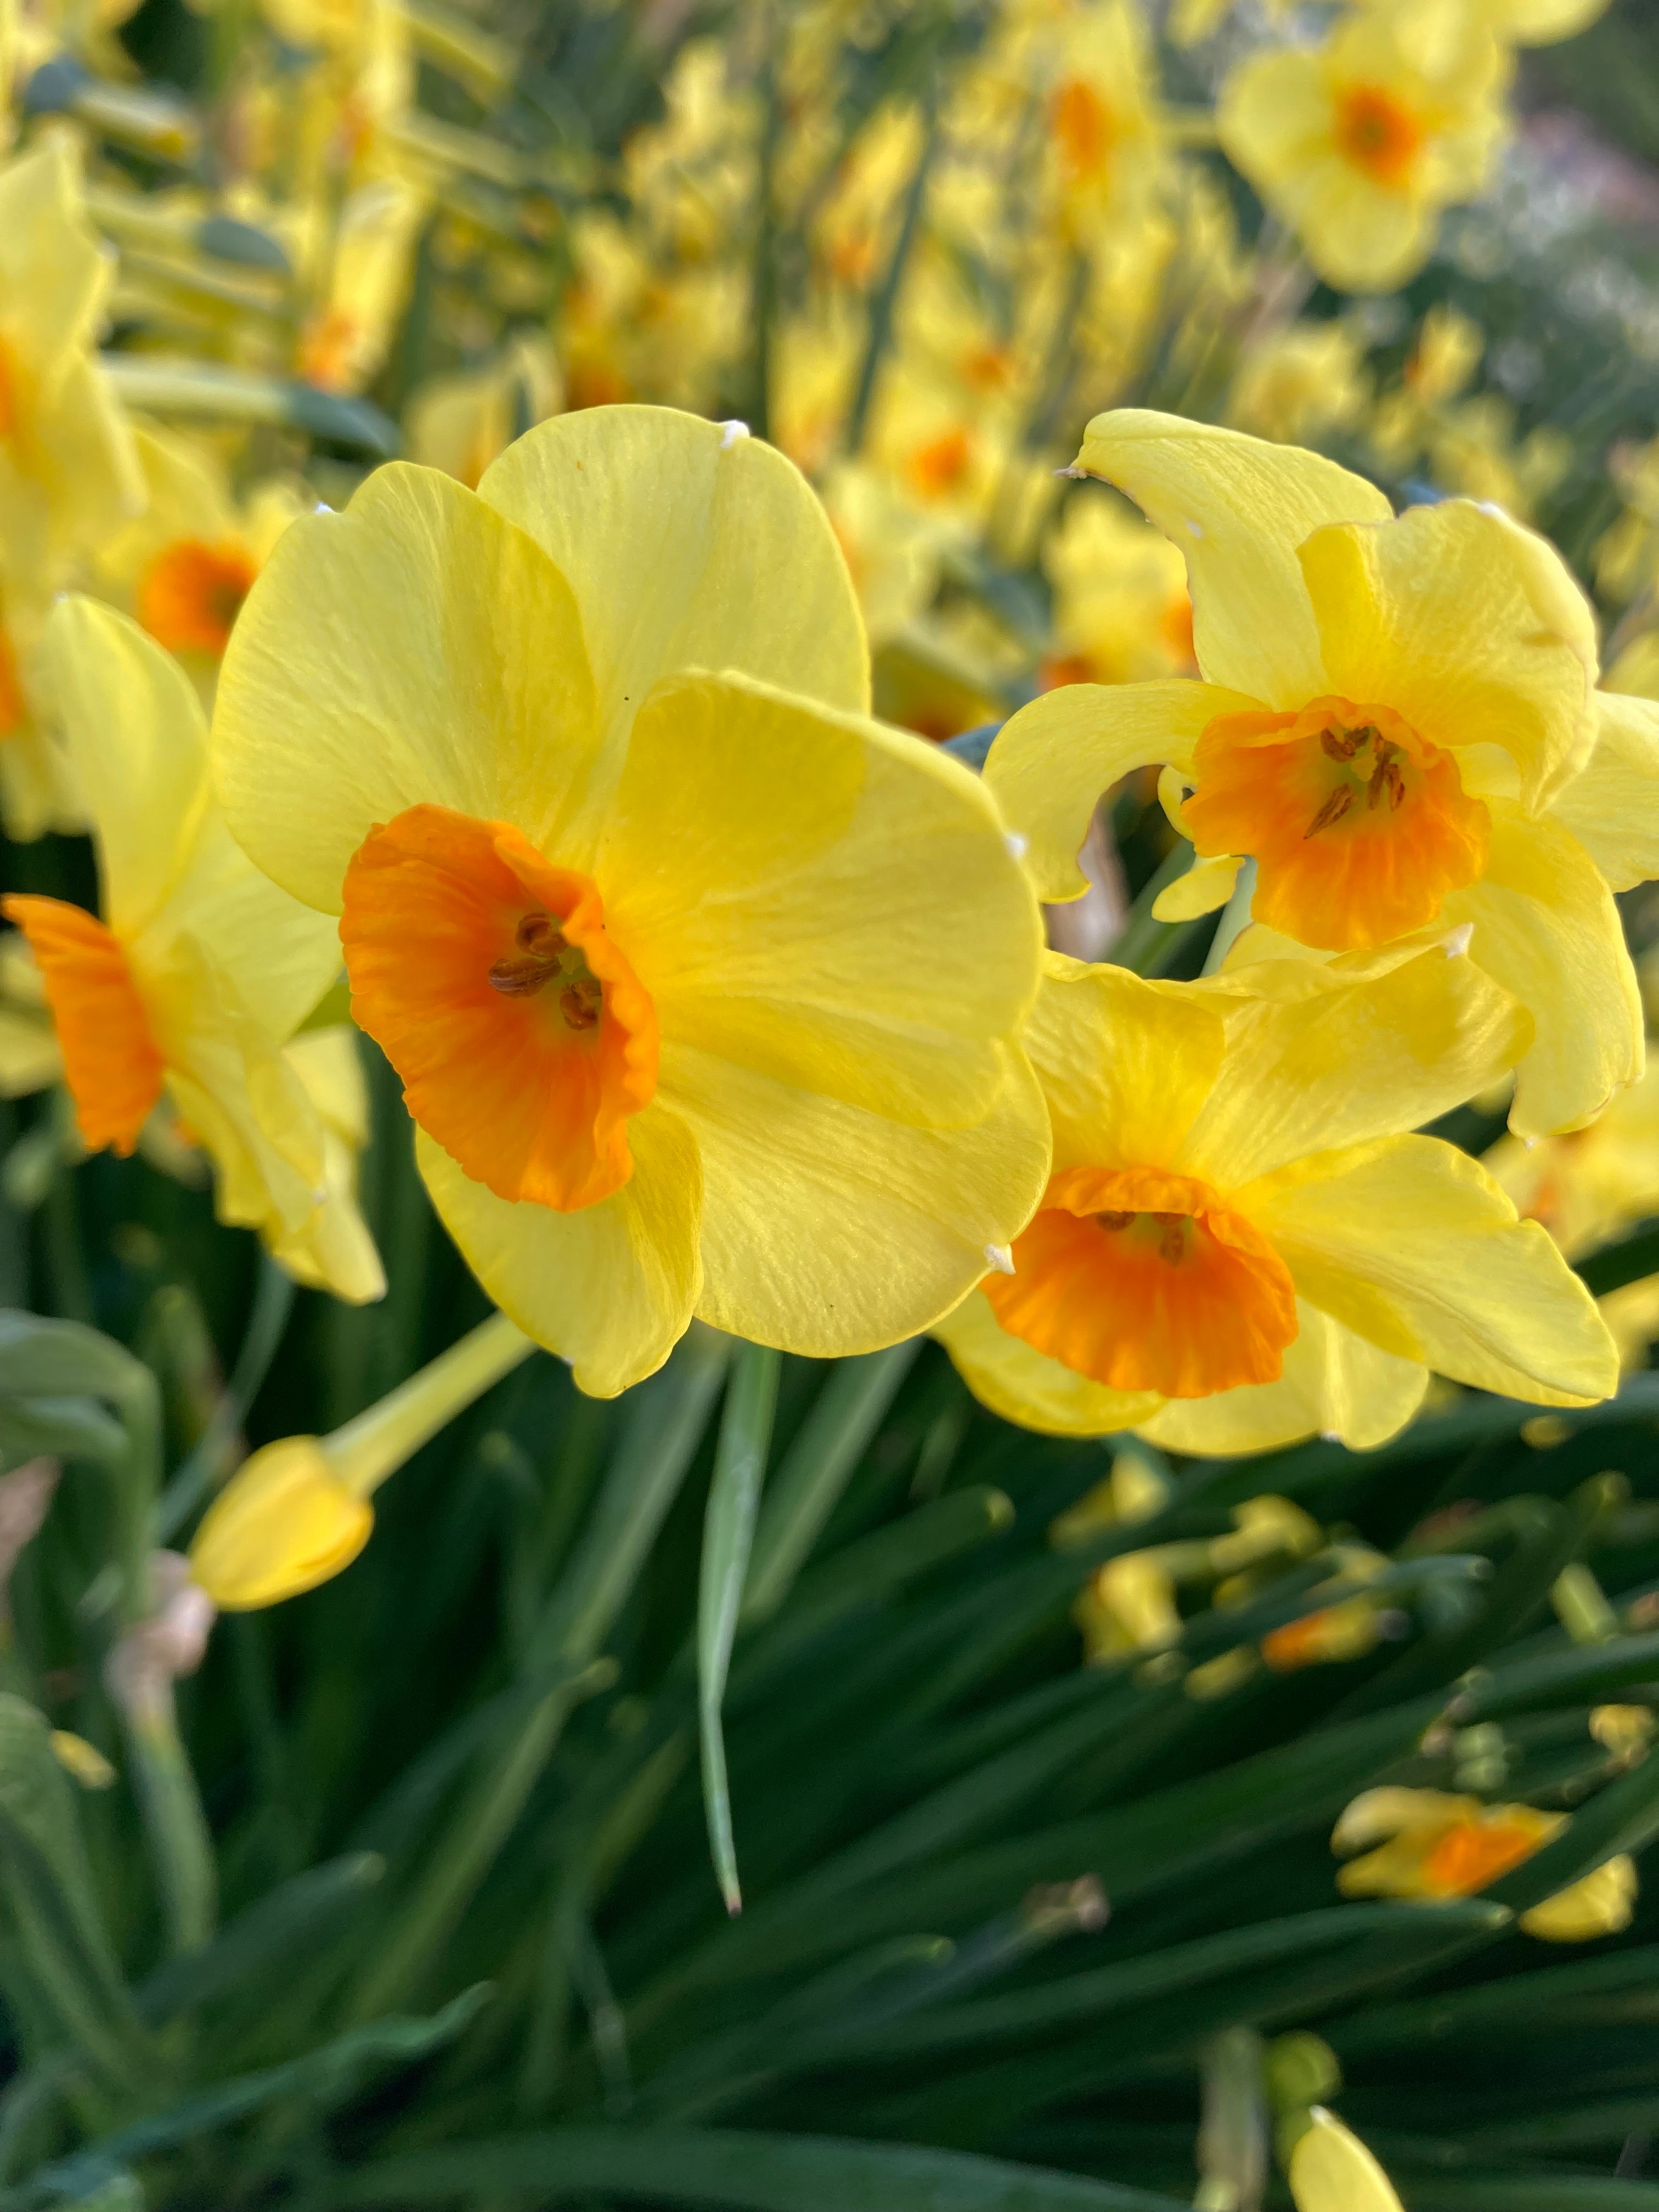 Narcissus 'Martinette' (Daffodil Bulbs) Free UK Postage